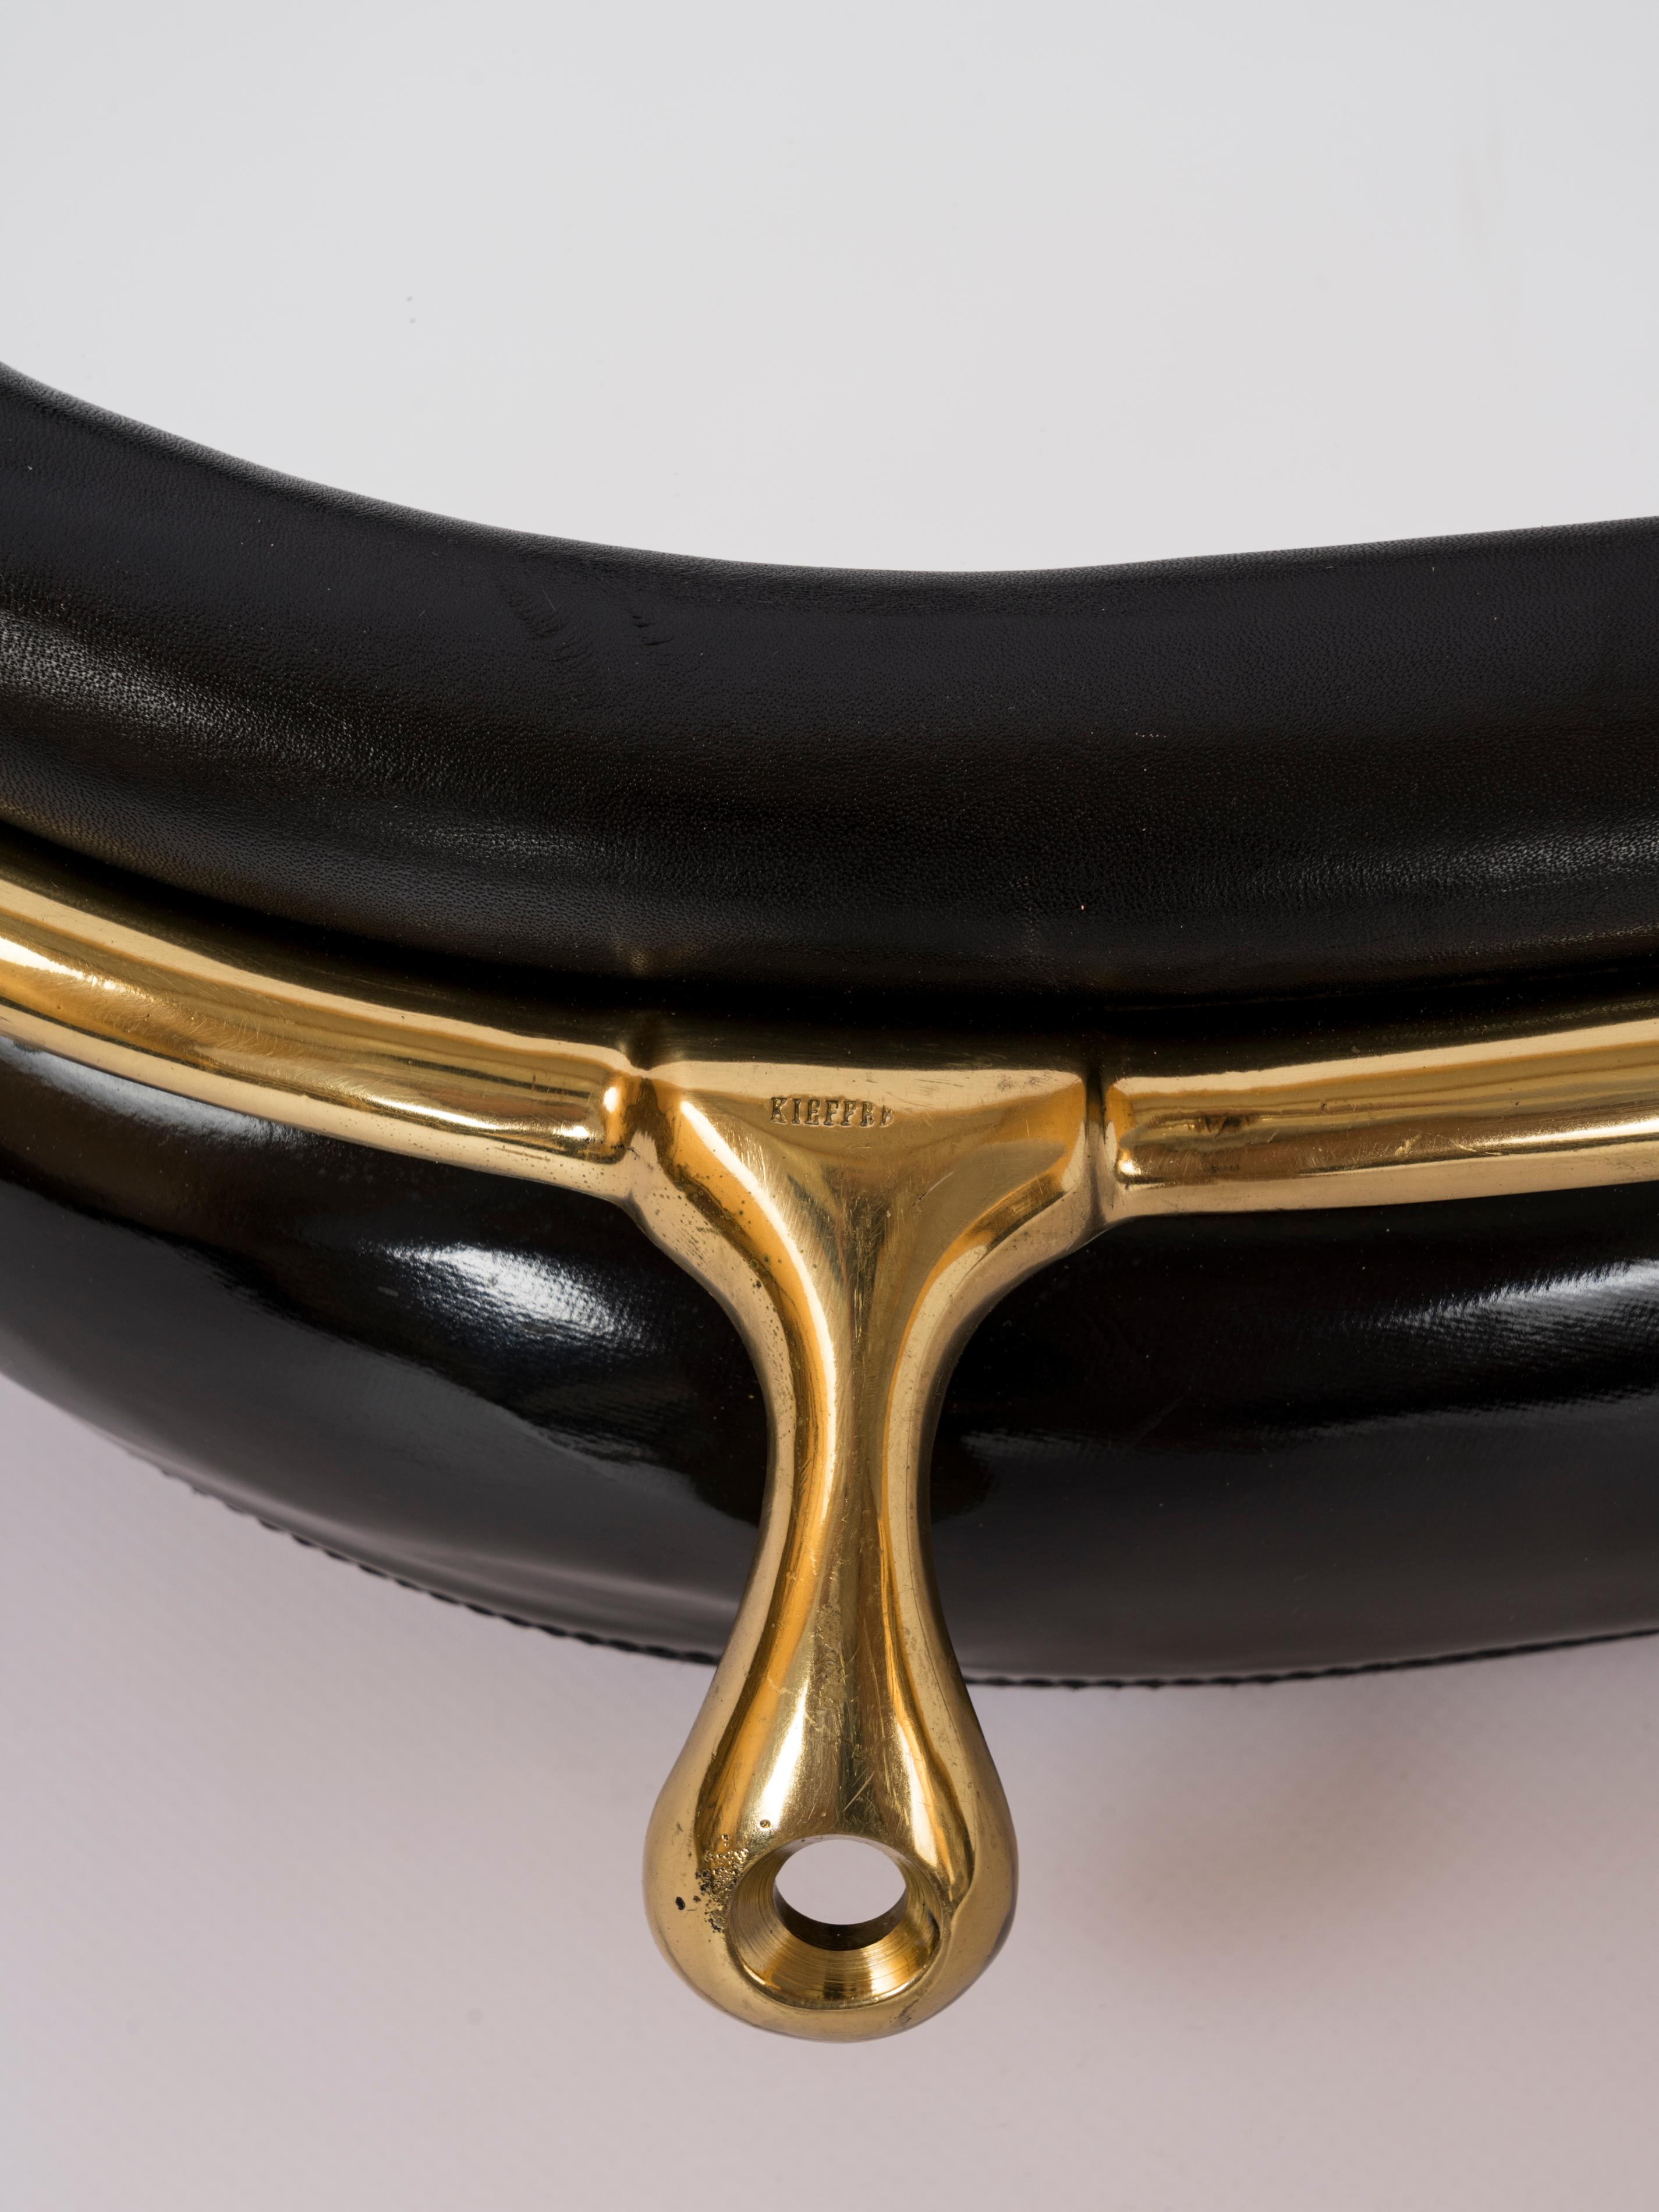 Padded Black Faux Leather & Brass Equestrian Mirror by Kieffer - France 1970's For Sale 3